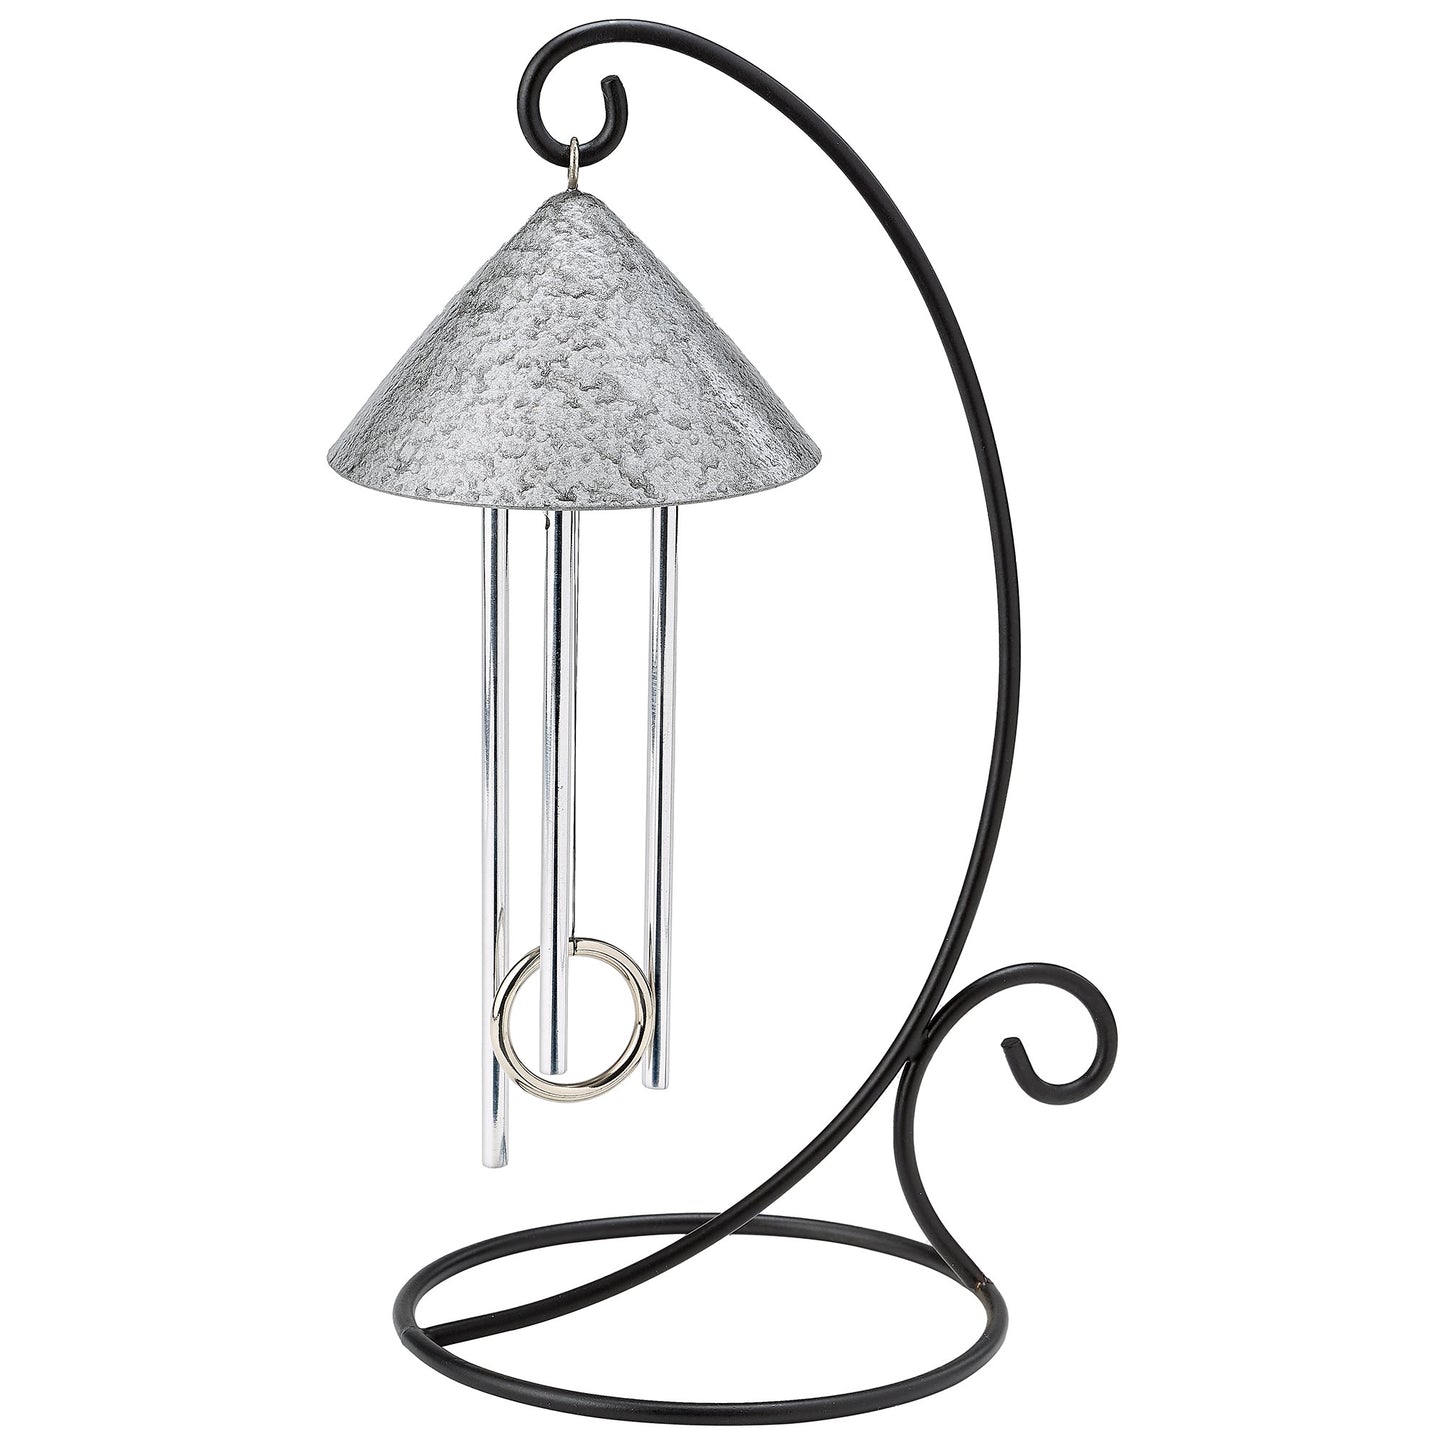 Indoor Tabletop solar wind chime in hammered pewter color made in US